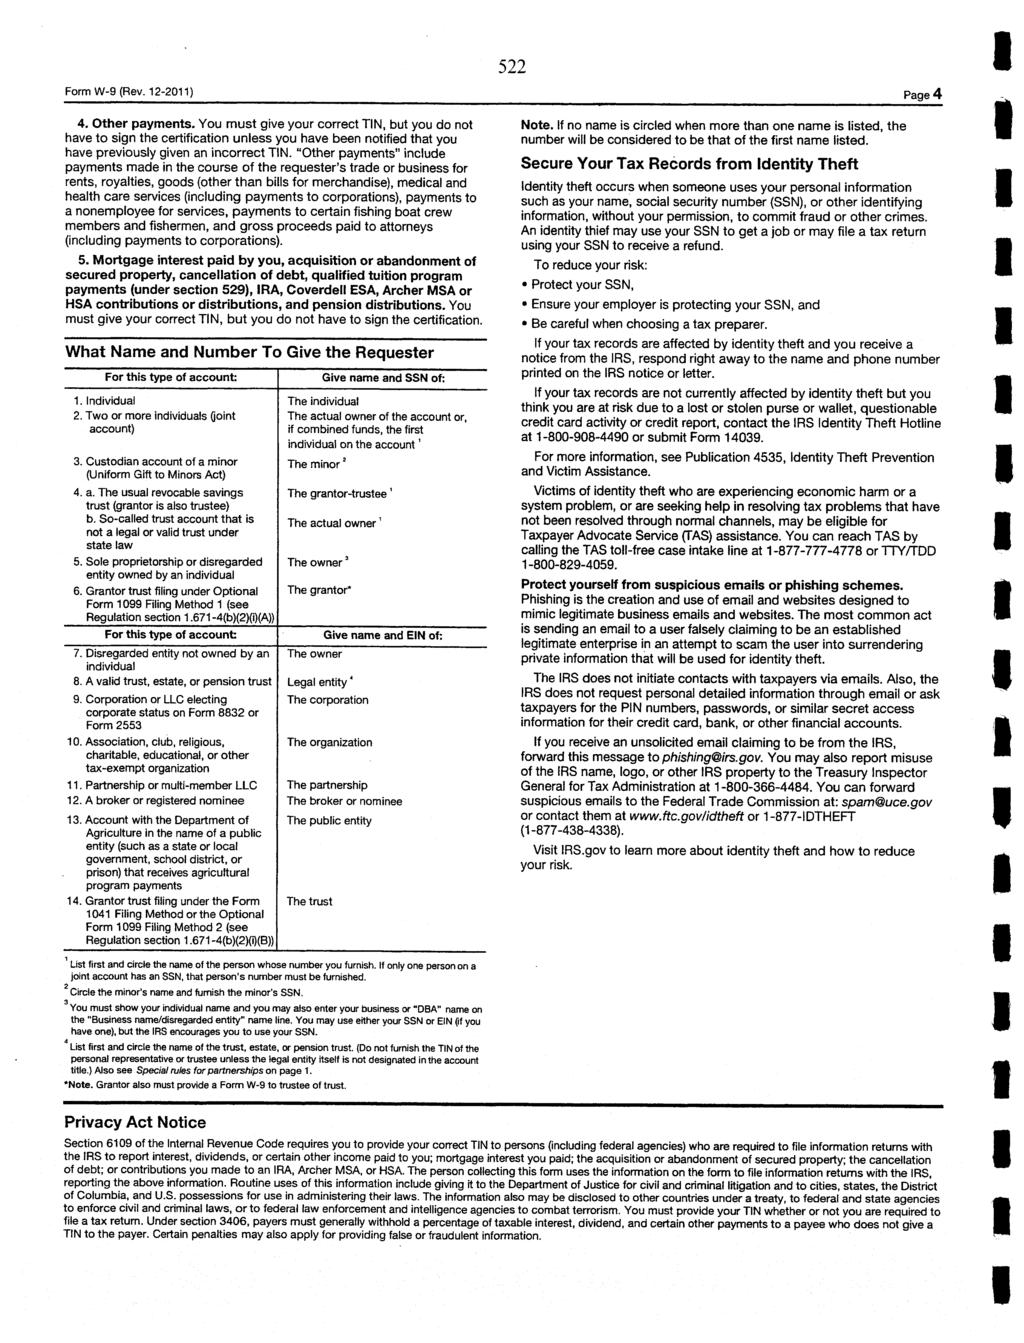 Form W-9 (Rev. 12-2011) 522 Page 4 4. Other payments.